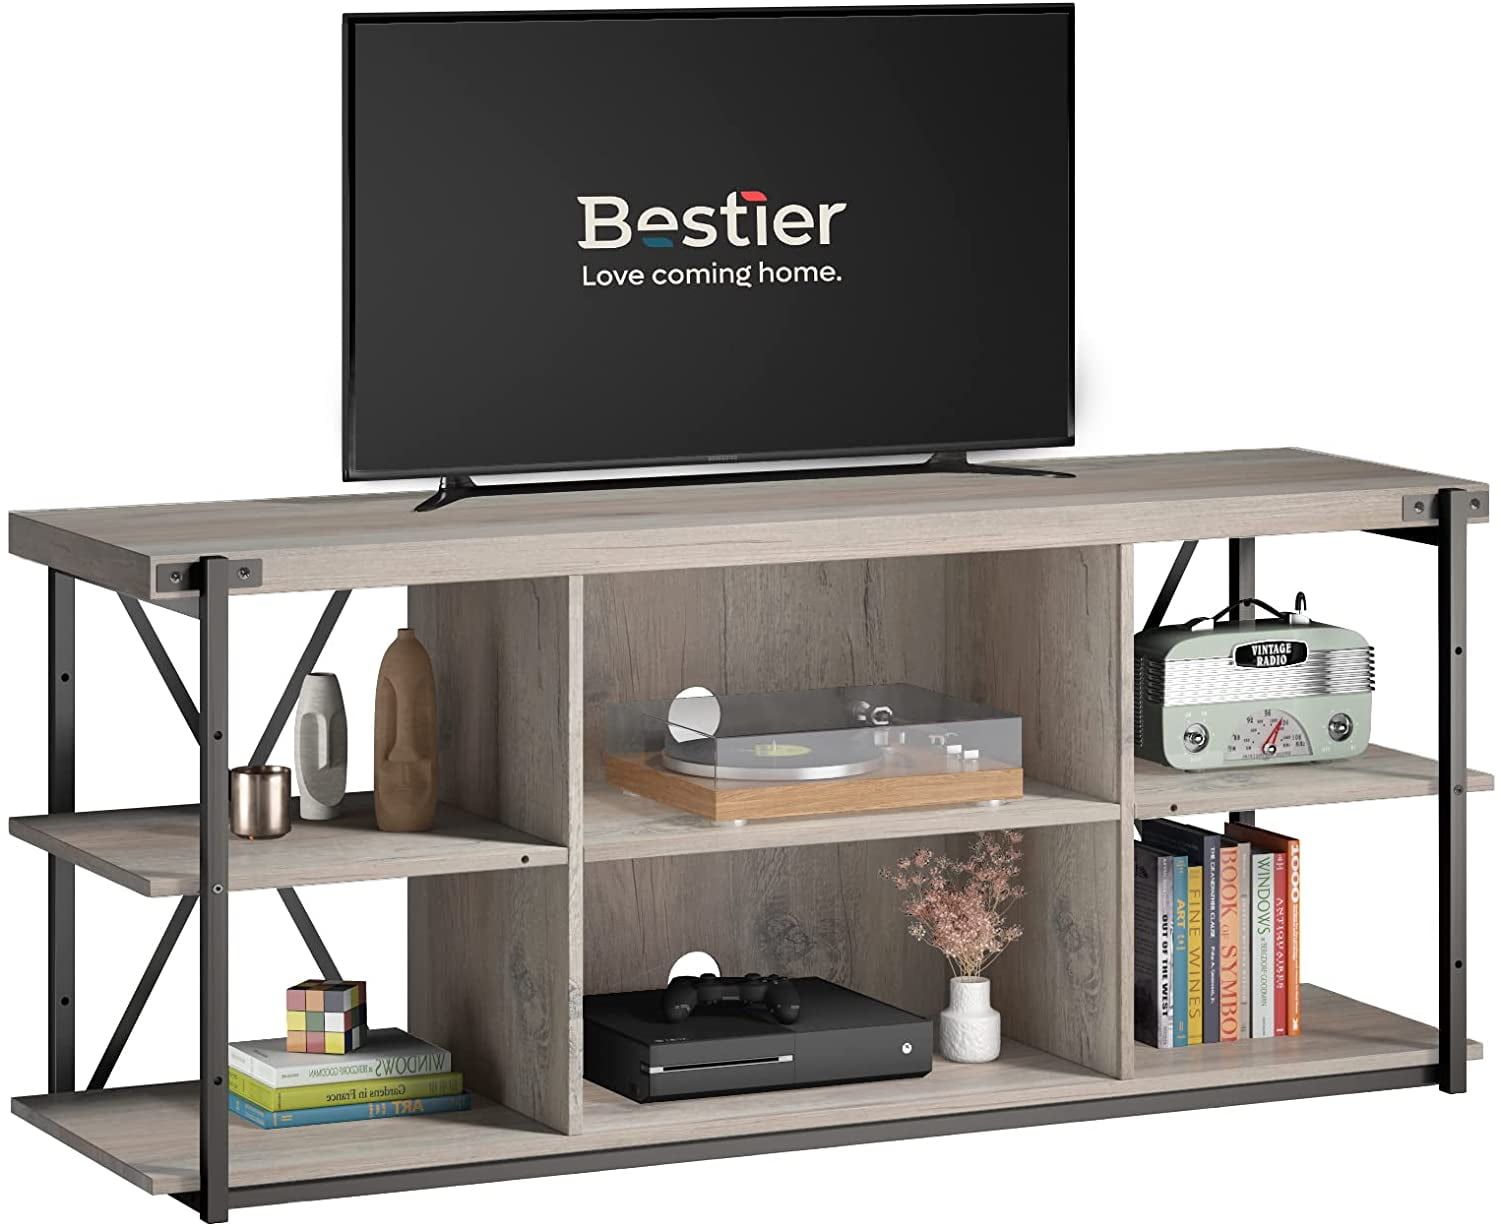 Bestier Farmhouse Tv Stand With Storage Shelves For Tvs Up To 65", Wash Intended For Farmhouse Stands With Shelves (Gallery 4 of 20)